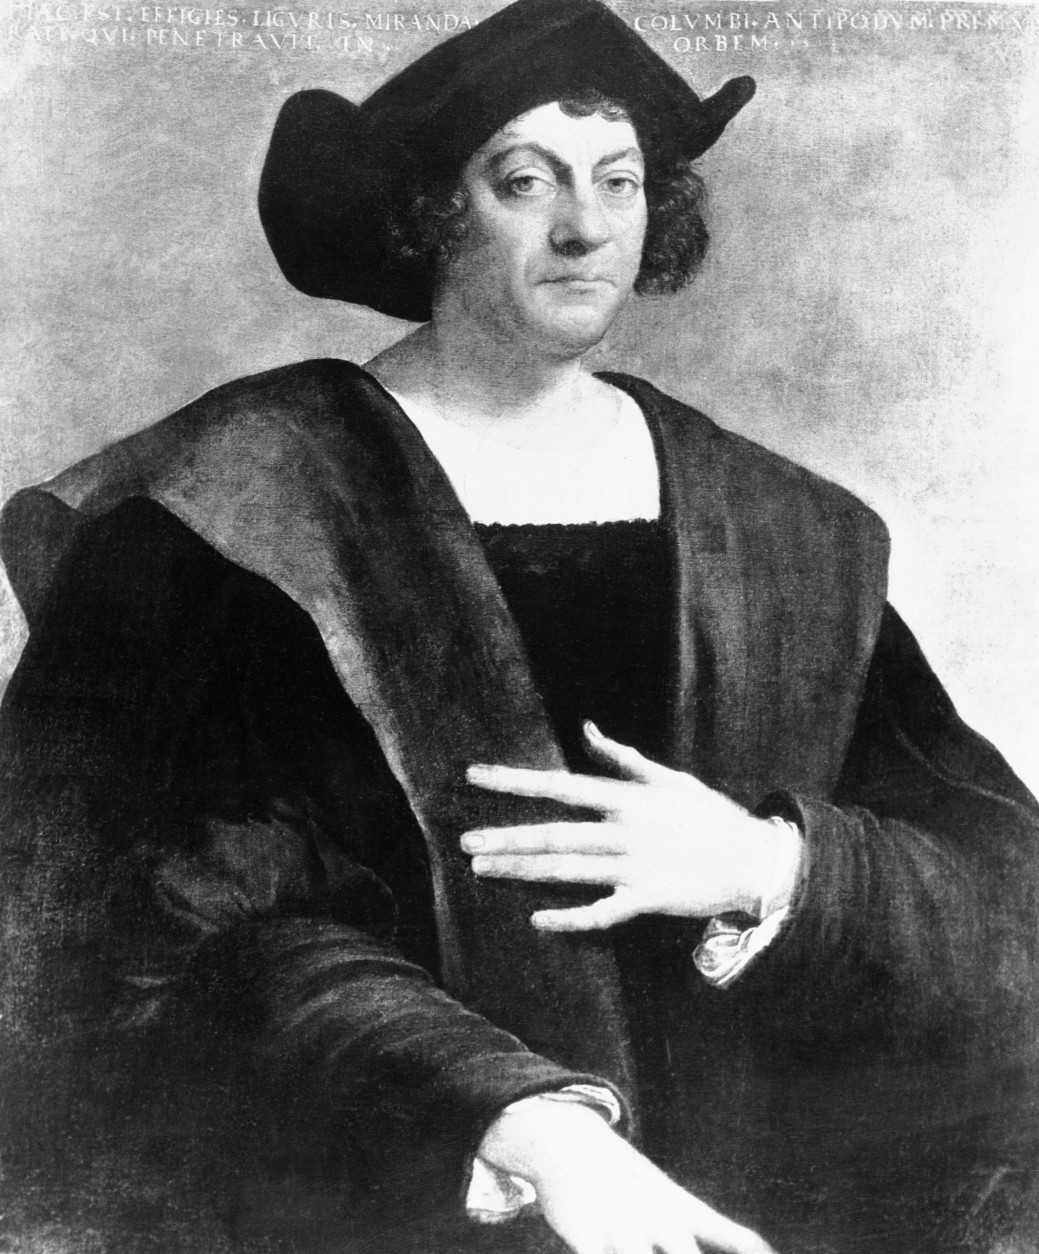 A painting of Christopher Columbus by Sebastiano del Piombo is seen, Sept. 19, 1943 at the Metropolitan Museum of Art in New York.  No portrait of Columbus from real life is known to exist but there are five standard types of which this is one.  (AP Photo)